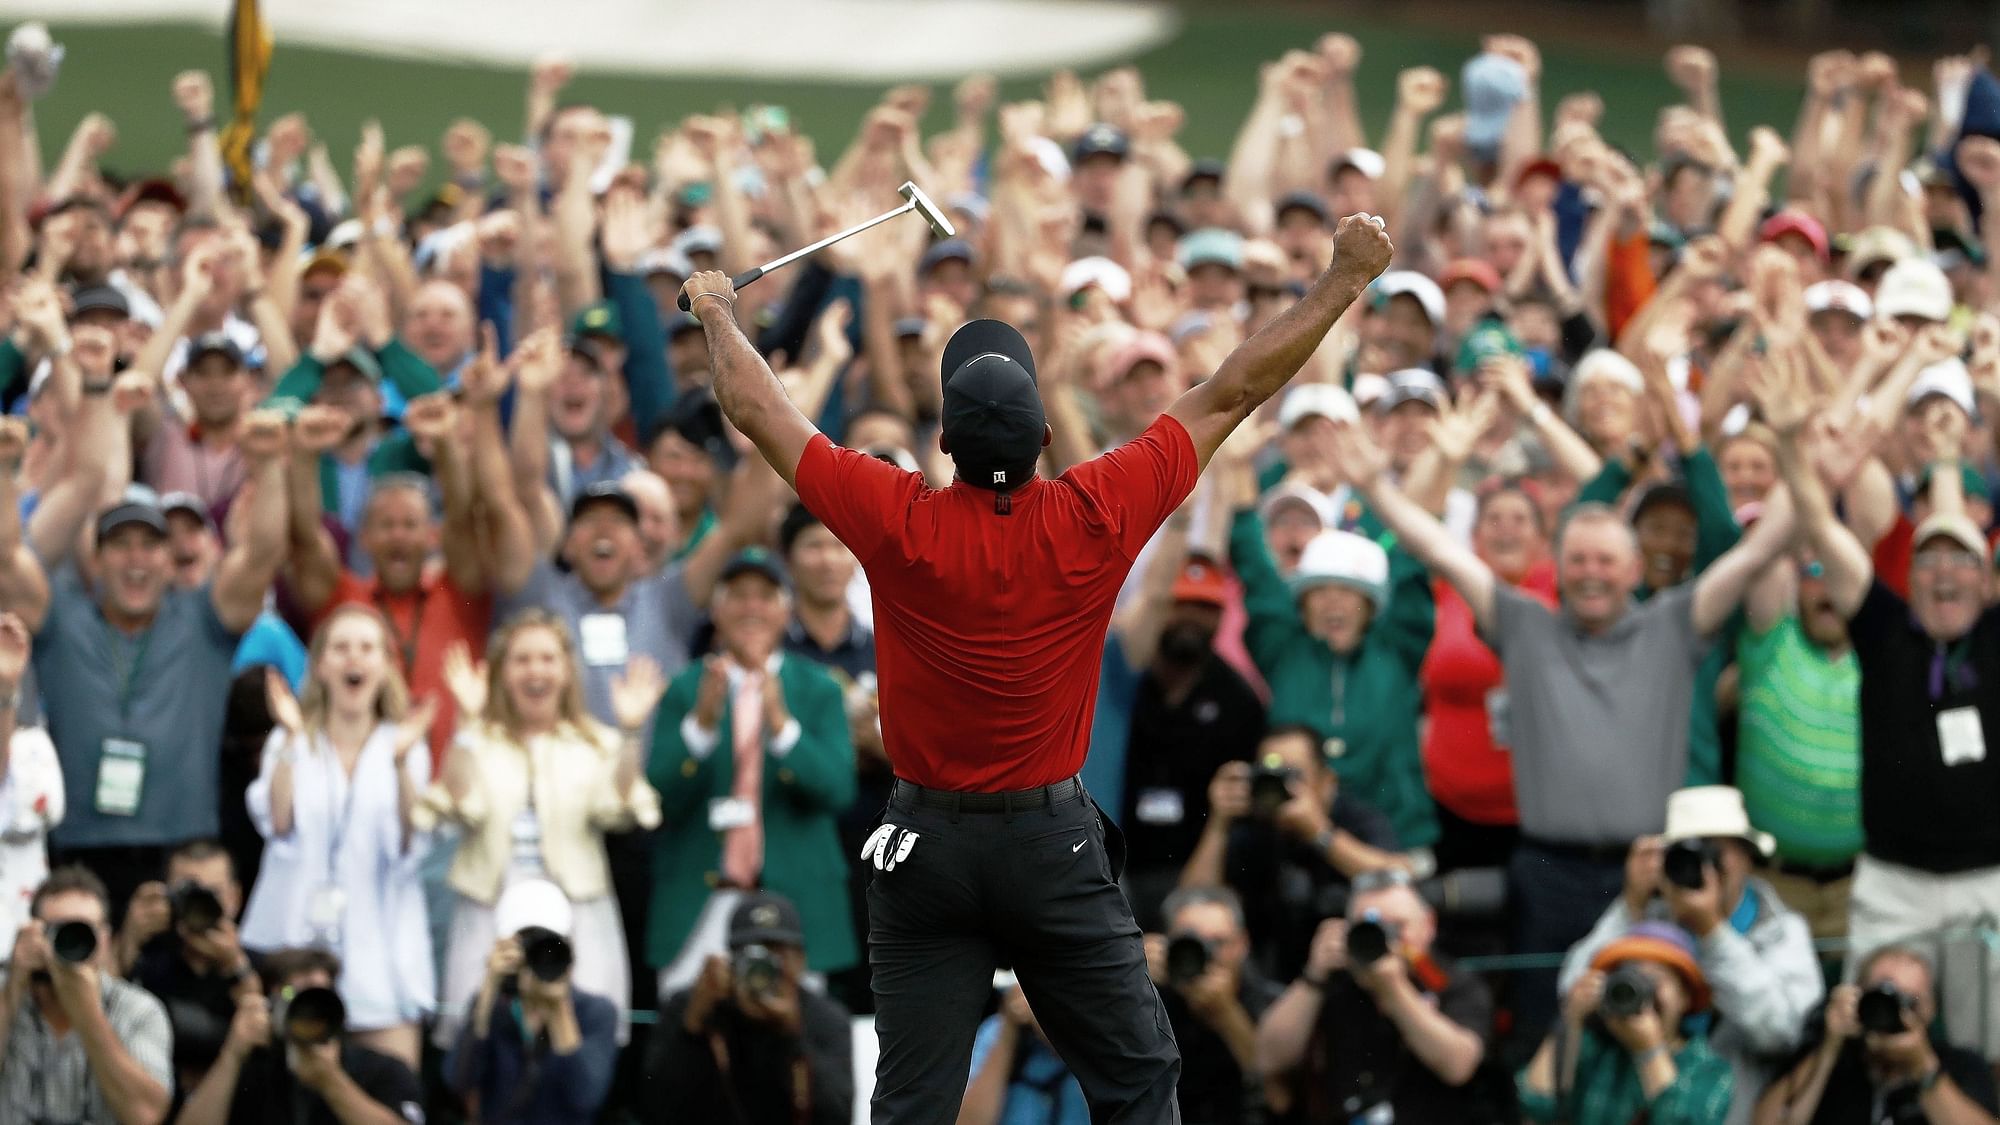 Tiger Woods won his 15th Major title on Sunday at The Masters.